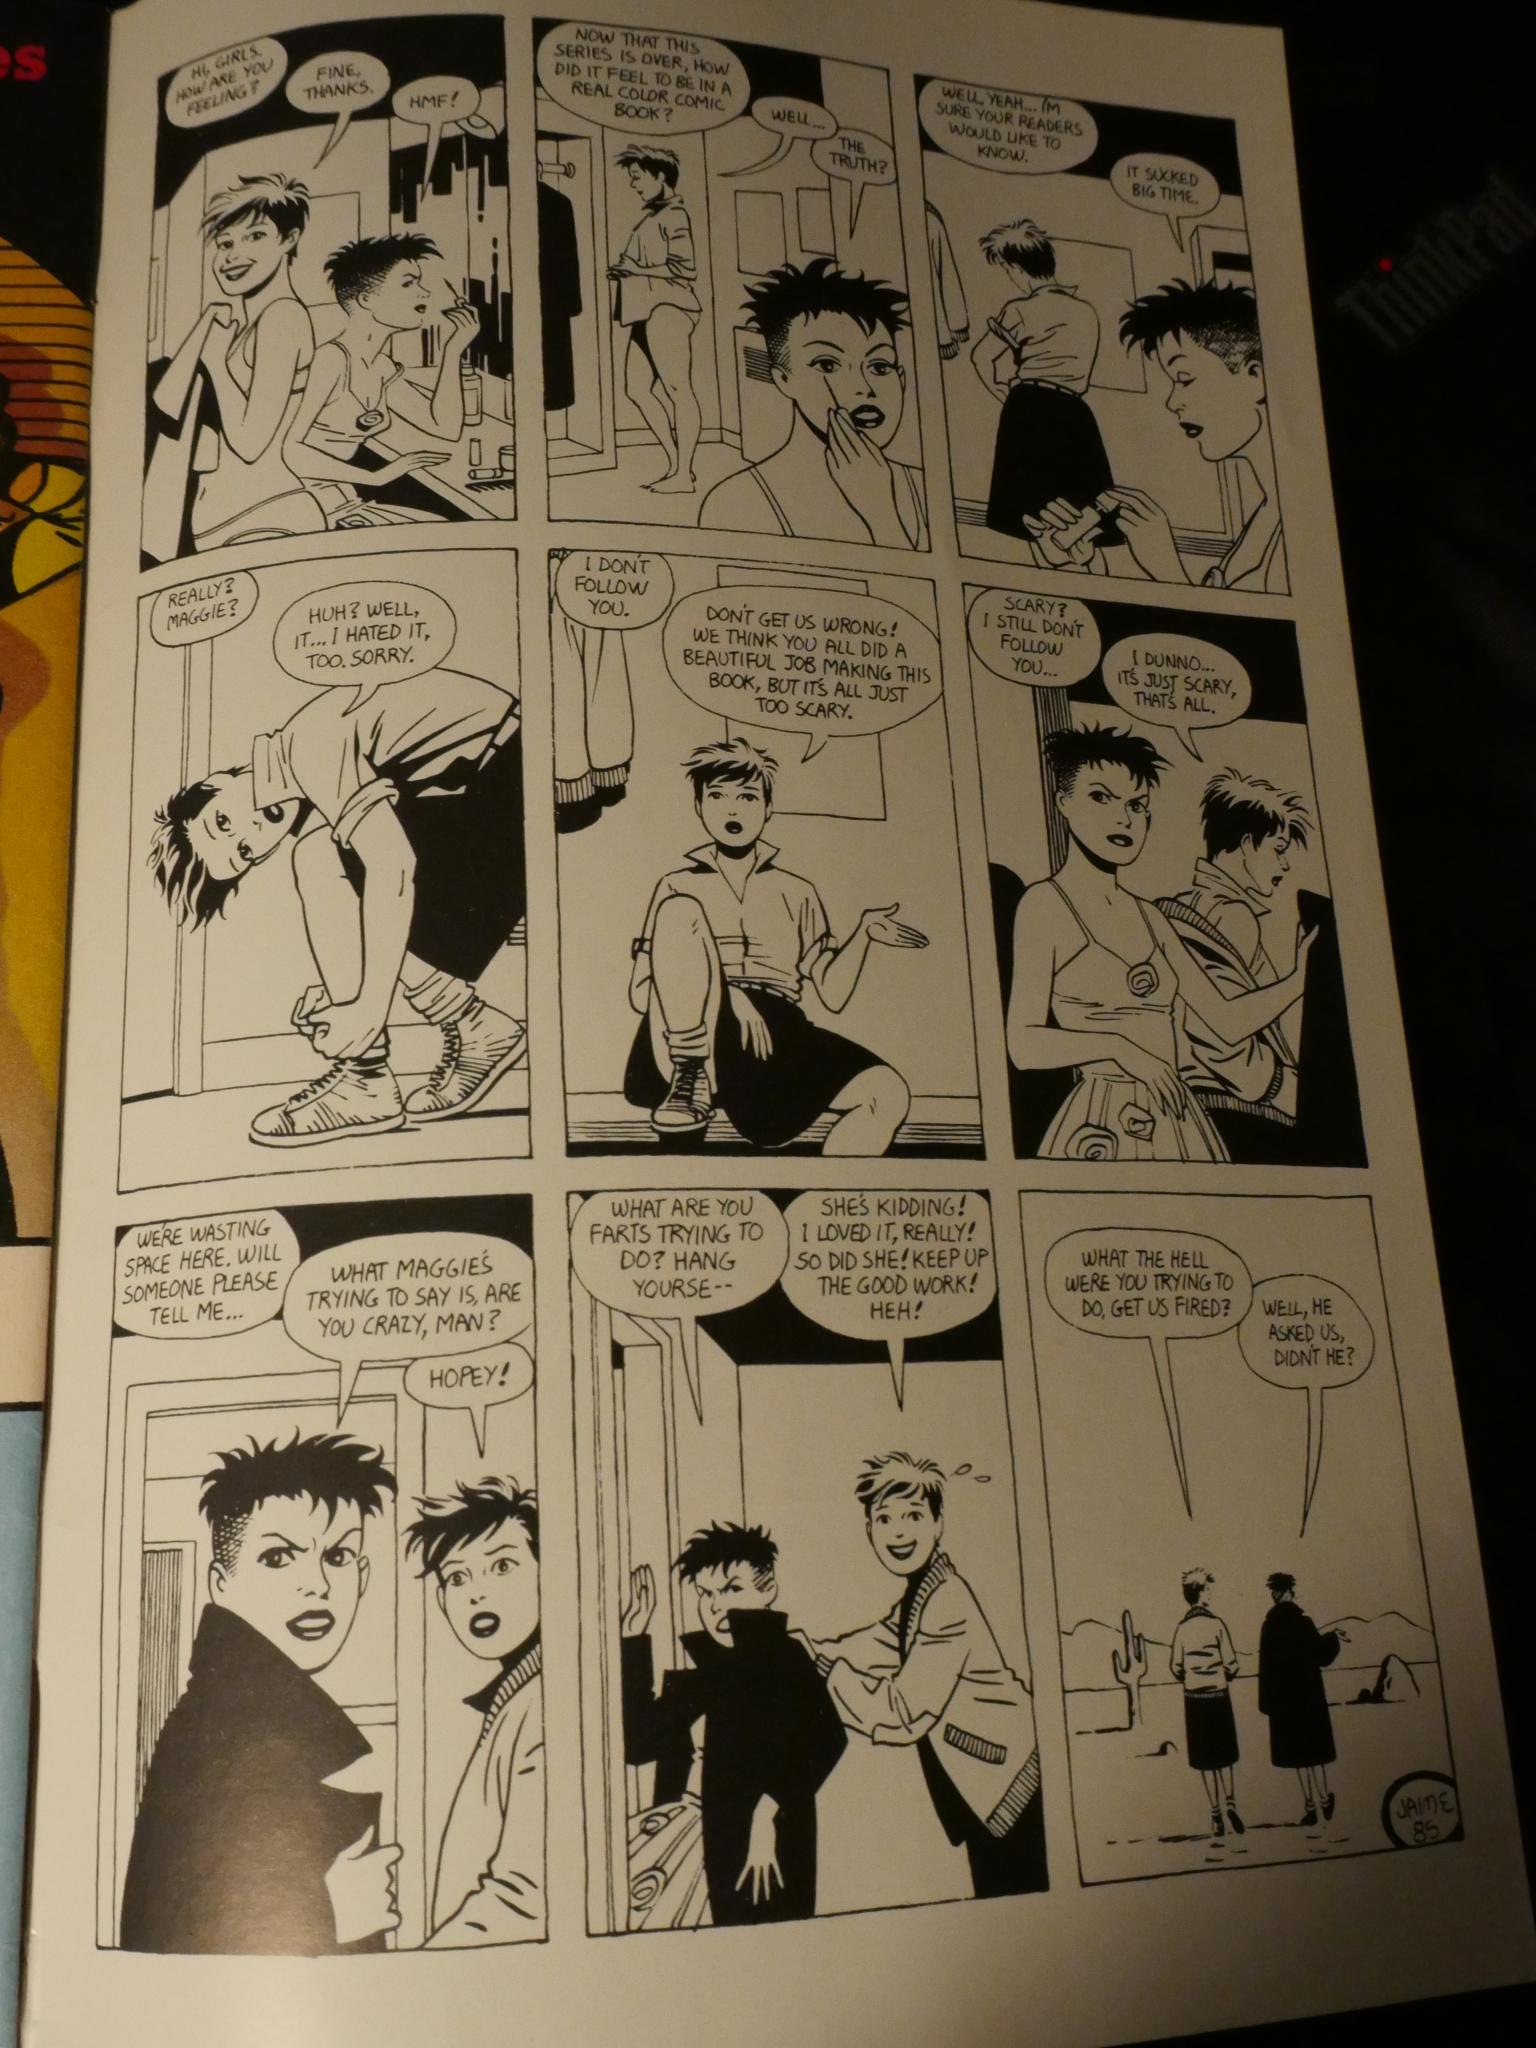 There's nothing like it in comics' … how Love and Rockets broke the rules, Comics and graphic novels